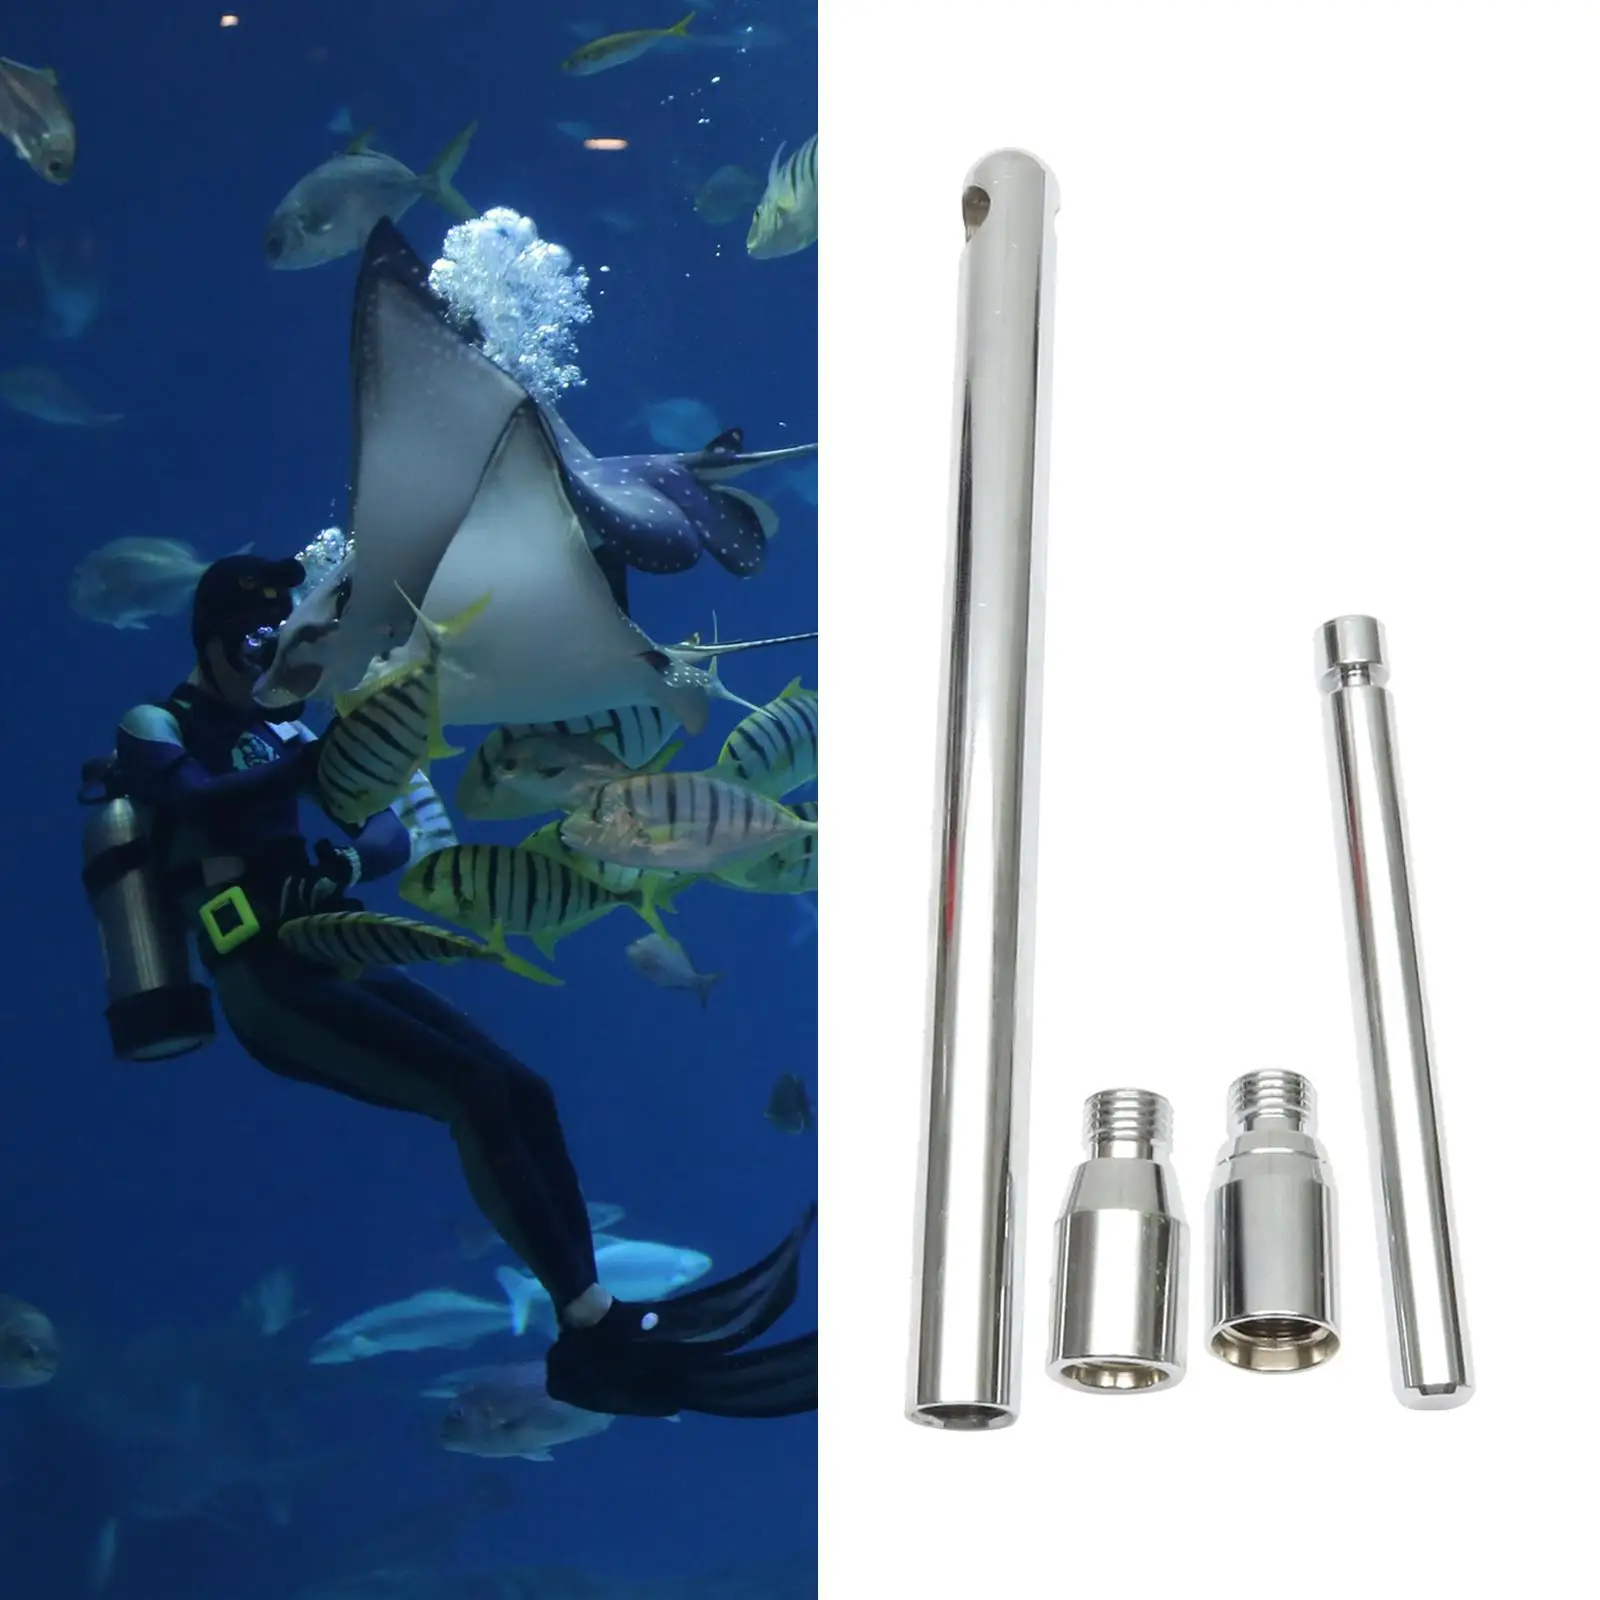 150mm Hose Protector Tool Durable Lightweight High Pressure Hand Install for Scuba Diving Gear Accessories Self Draining